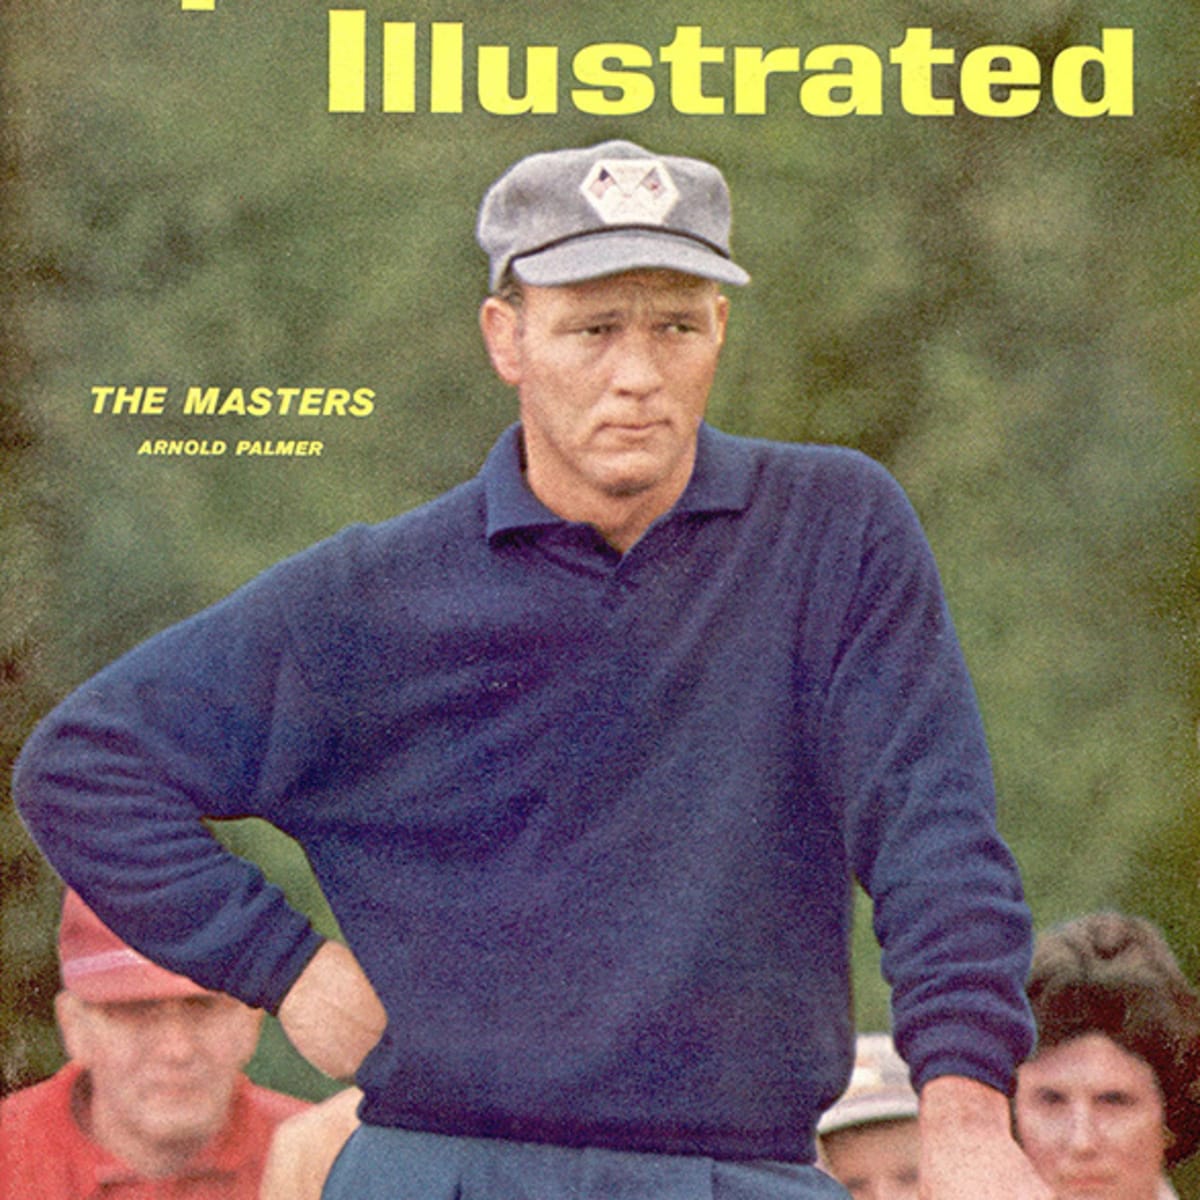 April 9, 1962 Table Of Contents - Sports Illustrated Vault